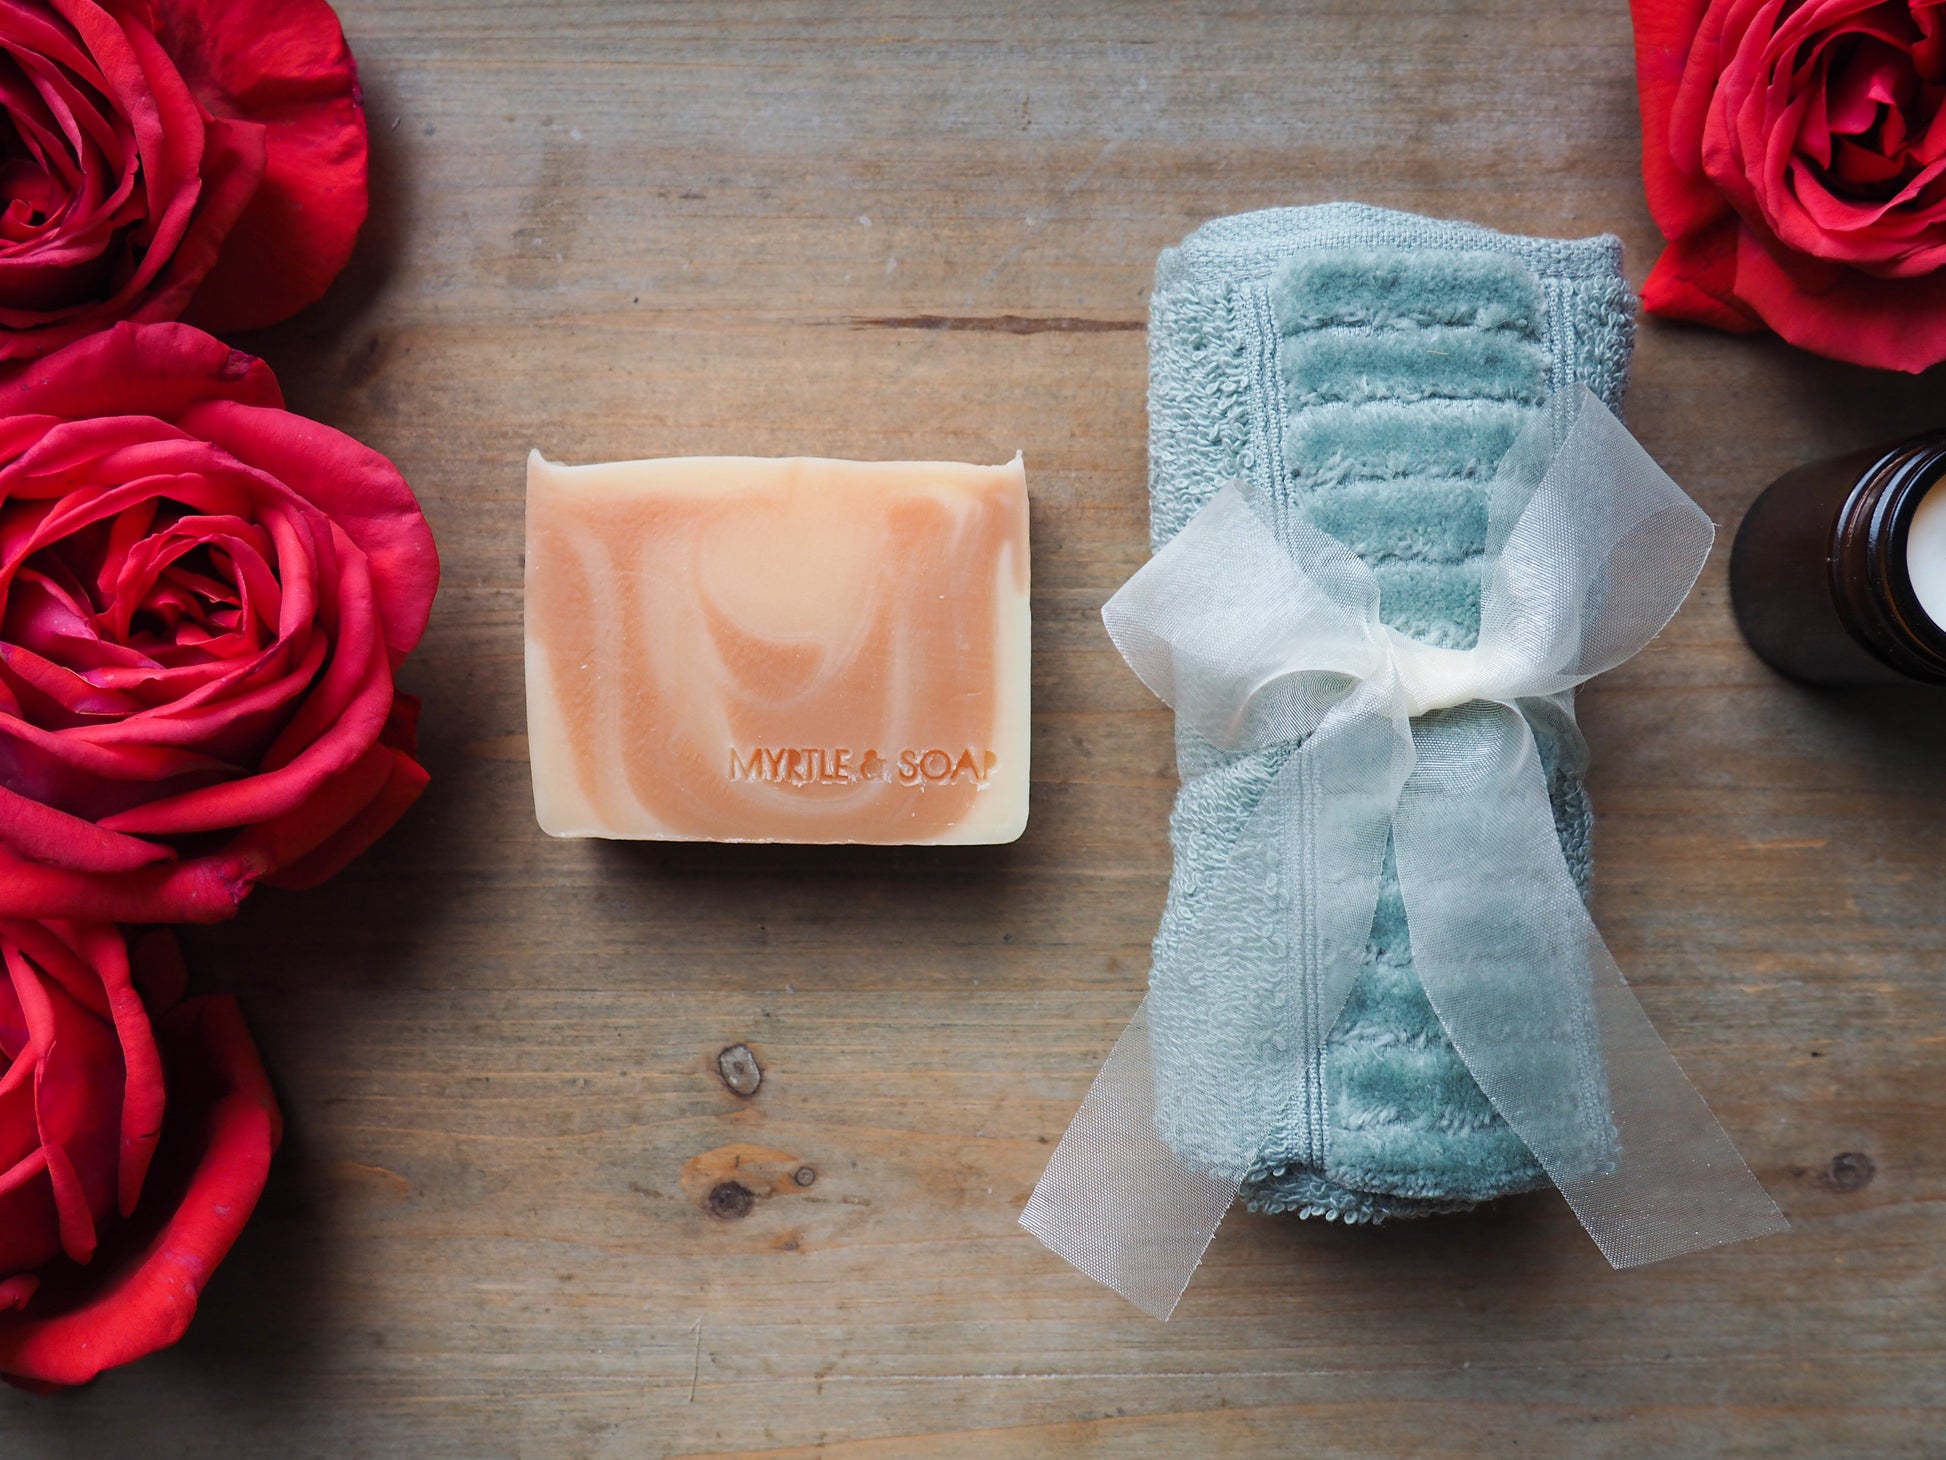 Box set with a luxurious Rose Blossom organic facial soap bar and a soft face towel made from 100% organic cotton